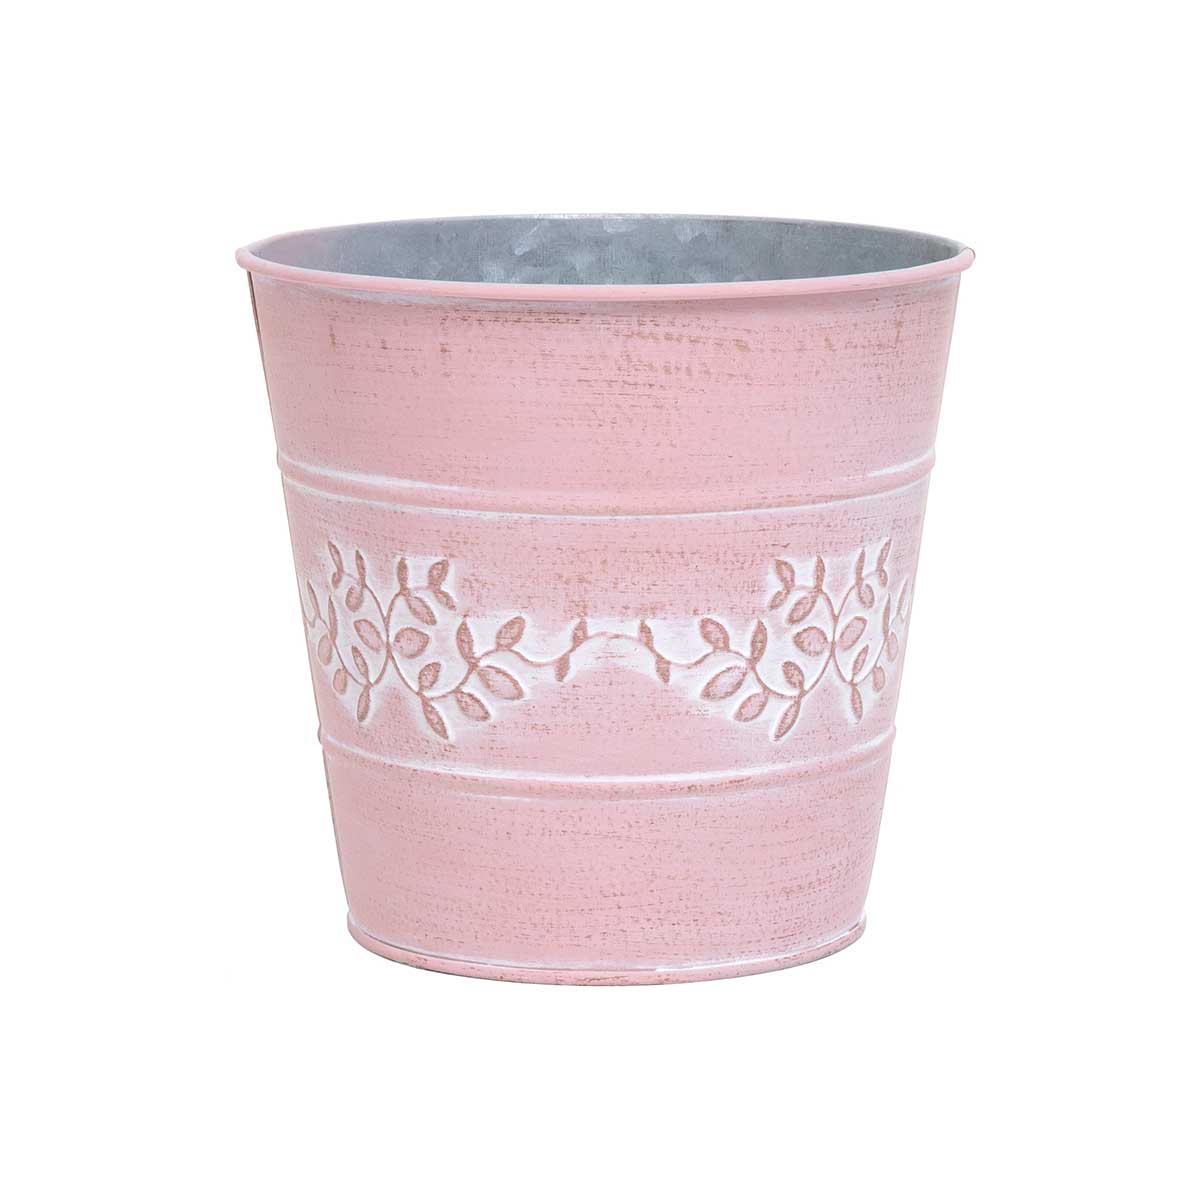 PINK METAL BUCKET WITH EMBOSSED PRIVET DESIGN SMALL 6"X5.5"